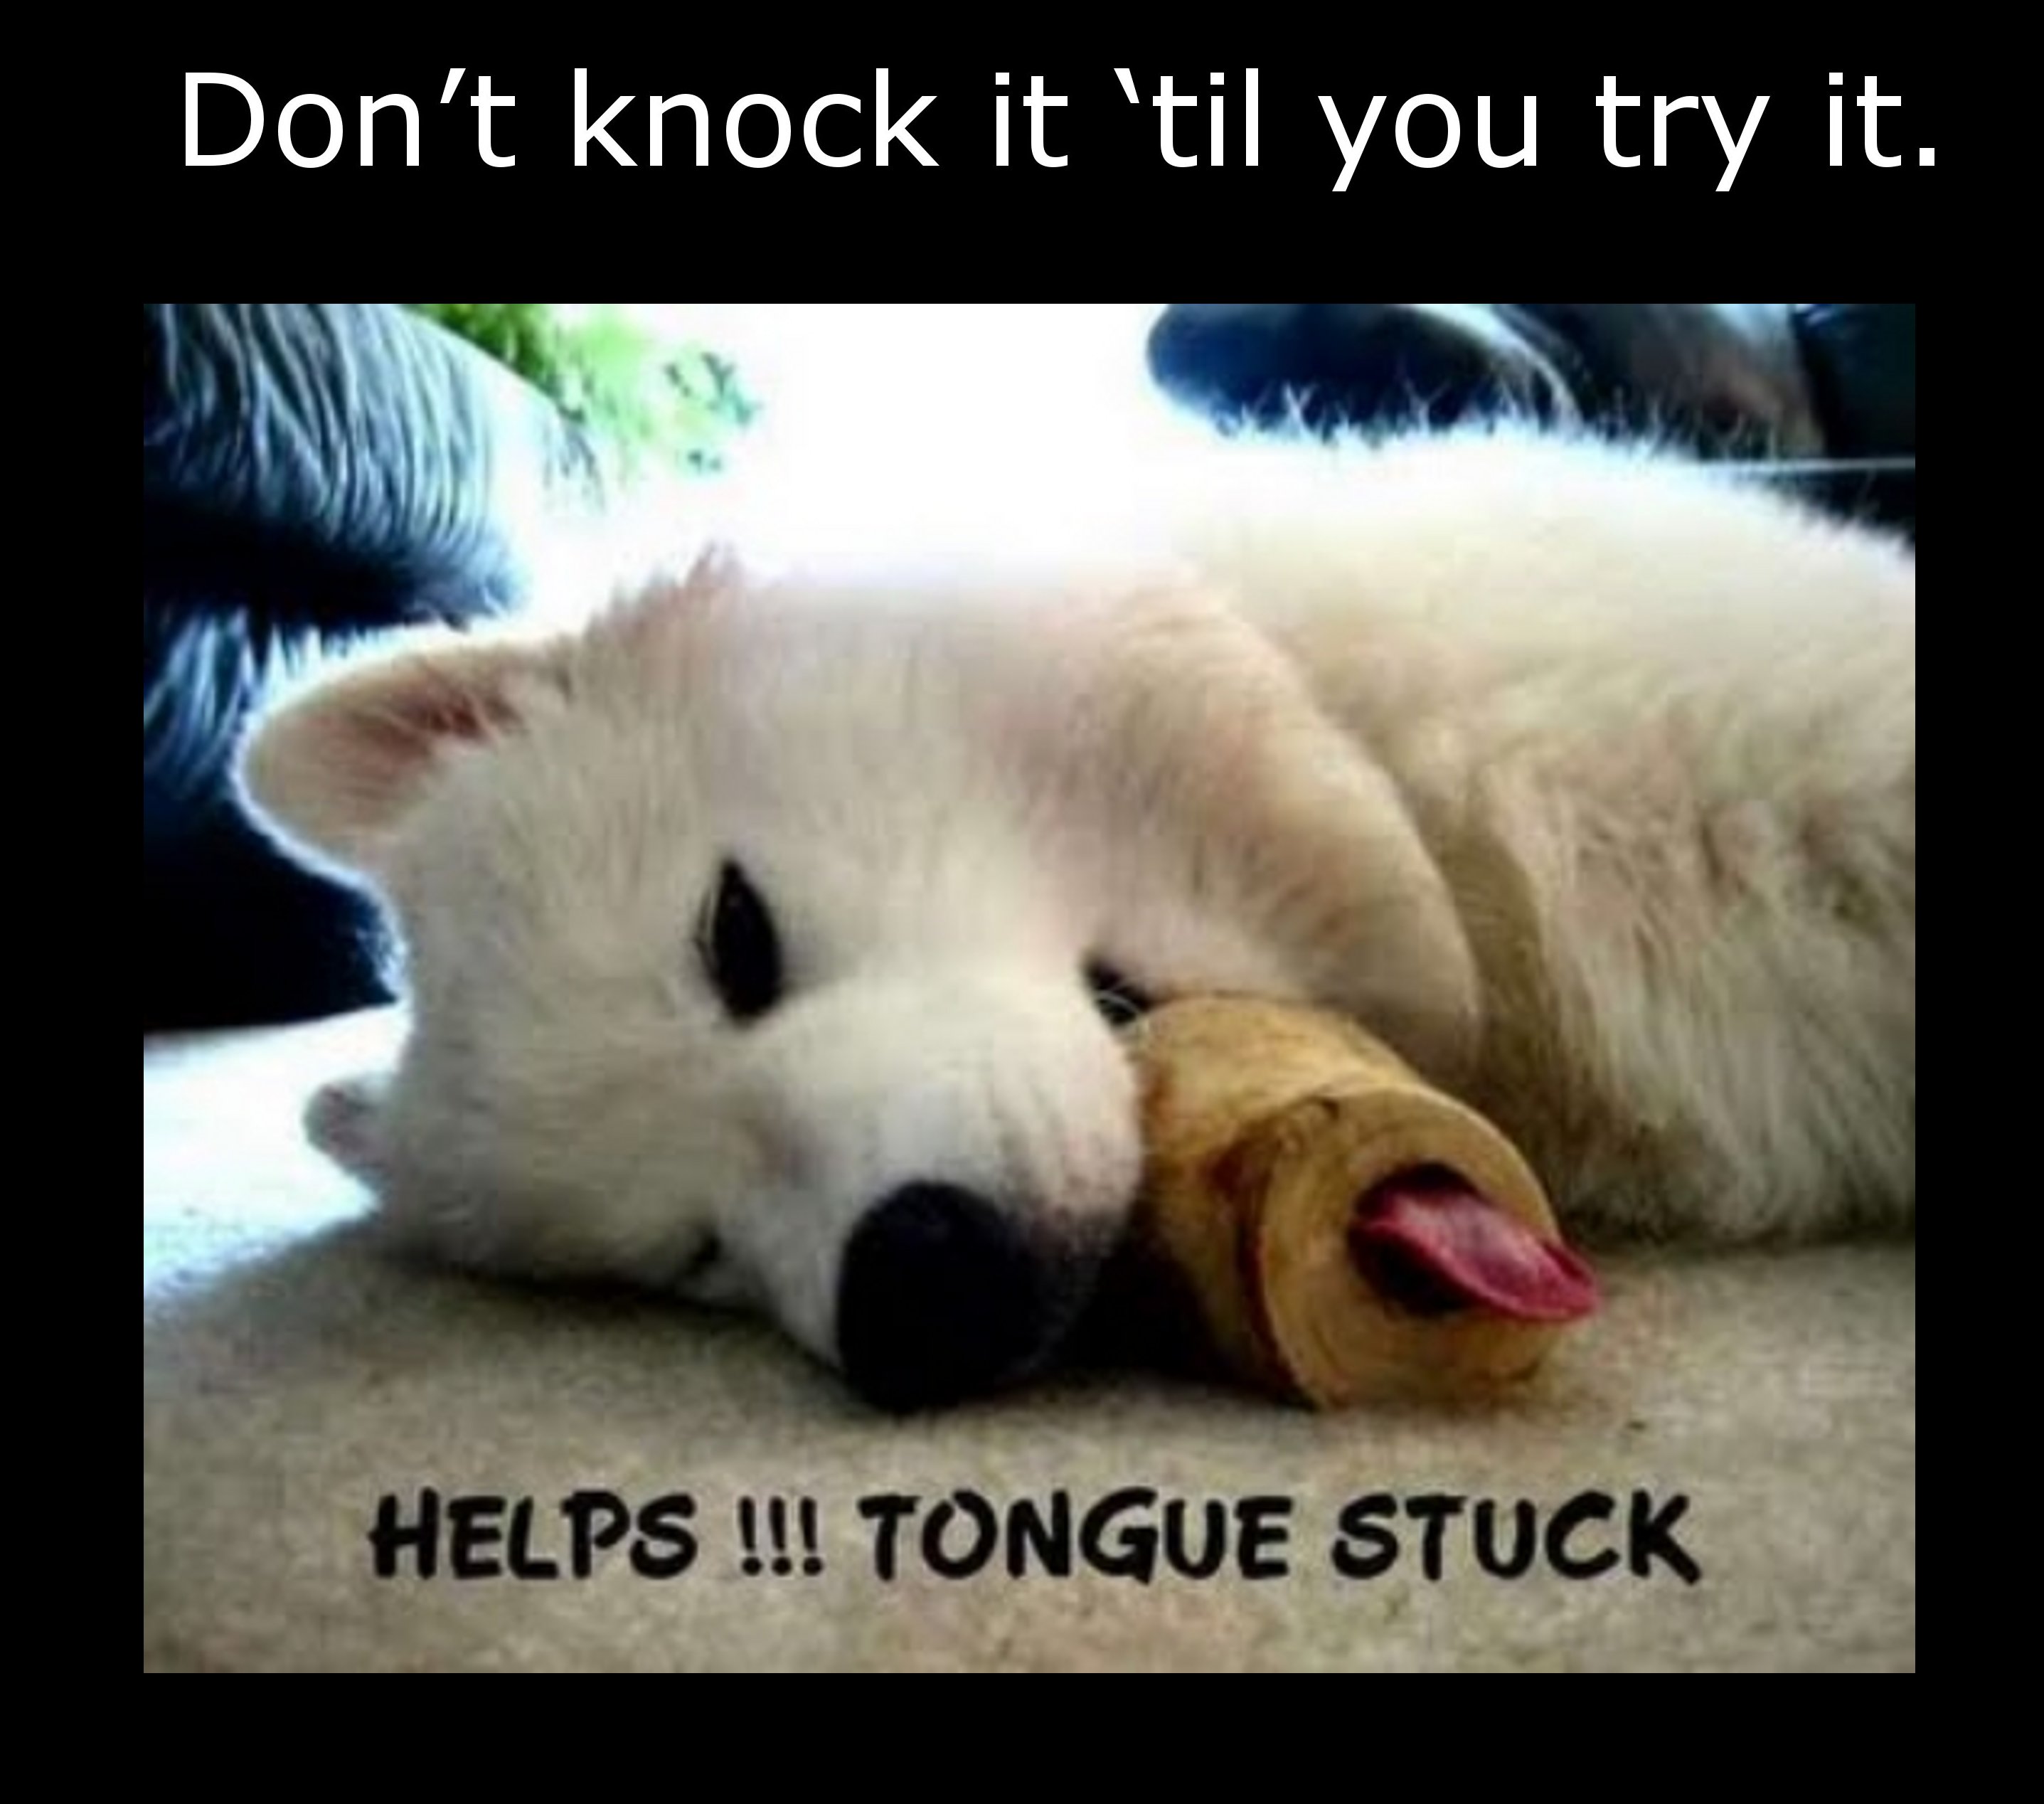 Good advice and funny animals